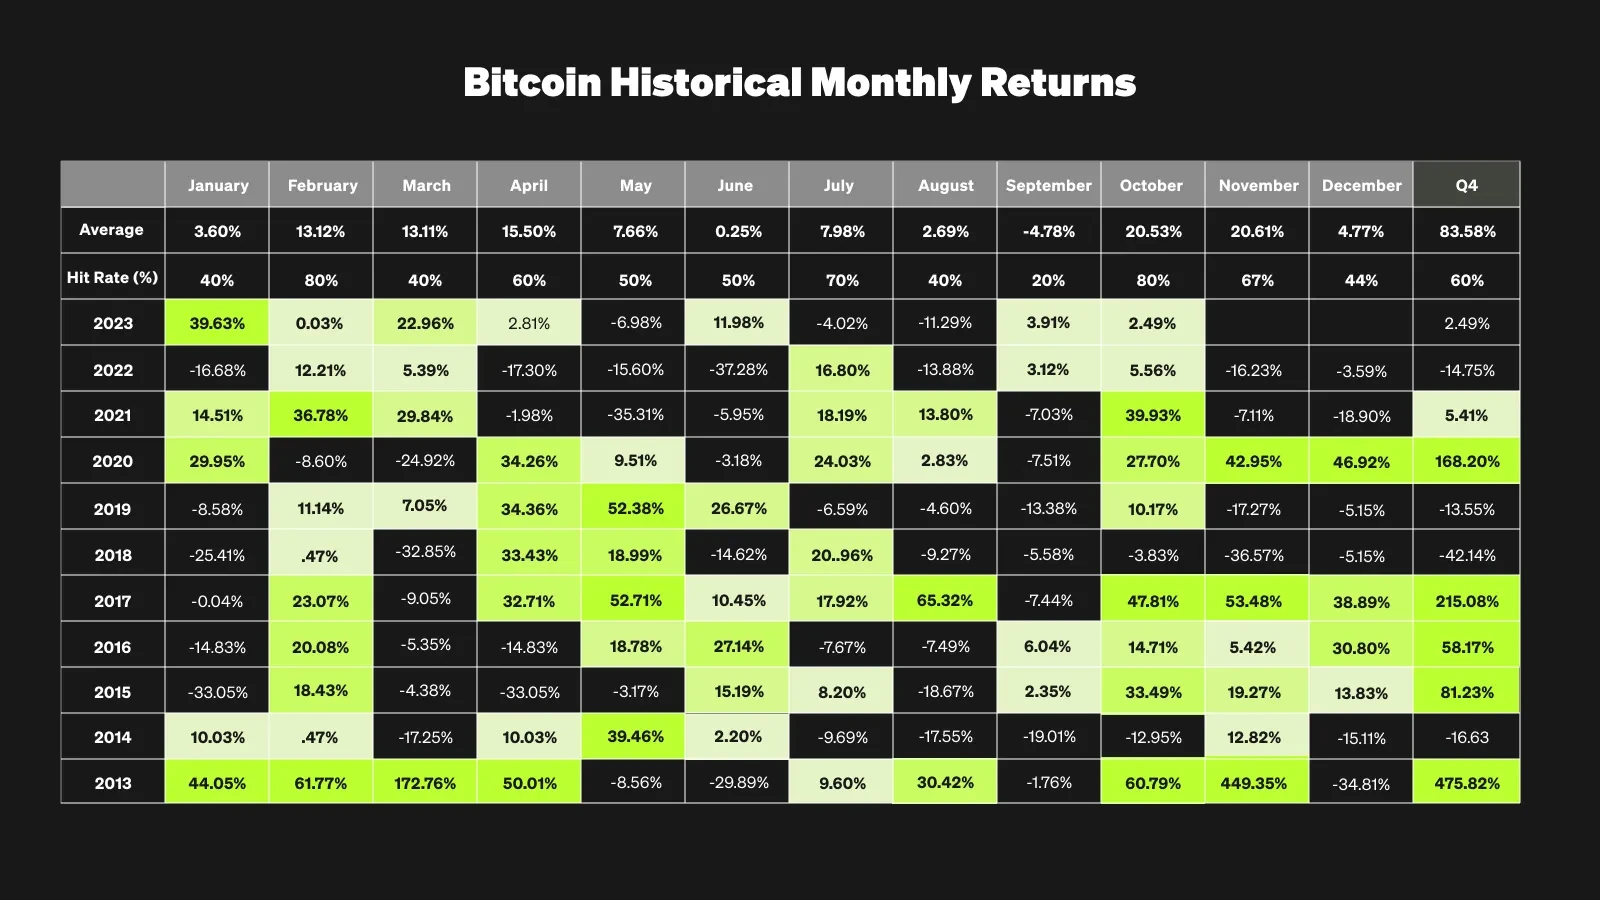 Bitcoin Historical Monthly Returns